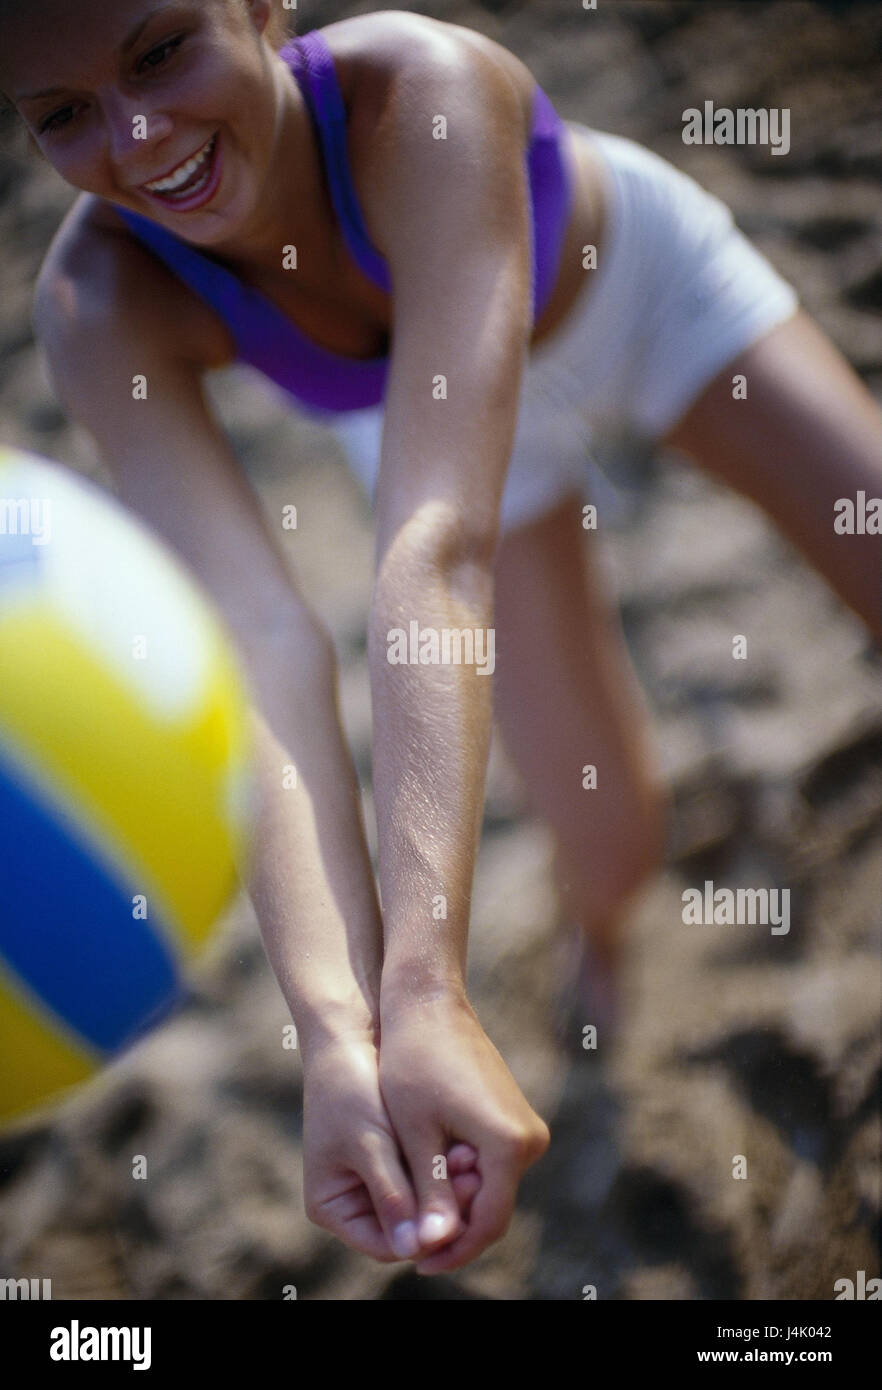 Beach, woman, volleyball, ball, accept, from above, blur very closely, sandy beach, summer, vacation, leisure time, lifestyle, young, sport, sportily, actively, activity, game, volleyball, Beachvolleyball, fitness, fit, motion, excavate Stock Photo